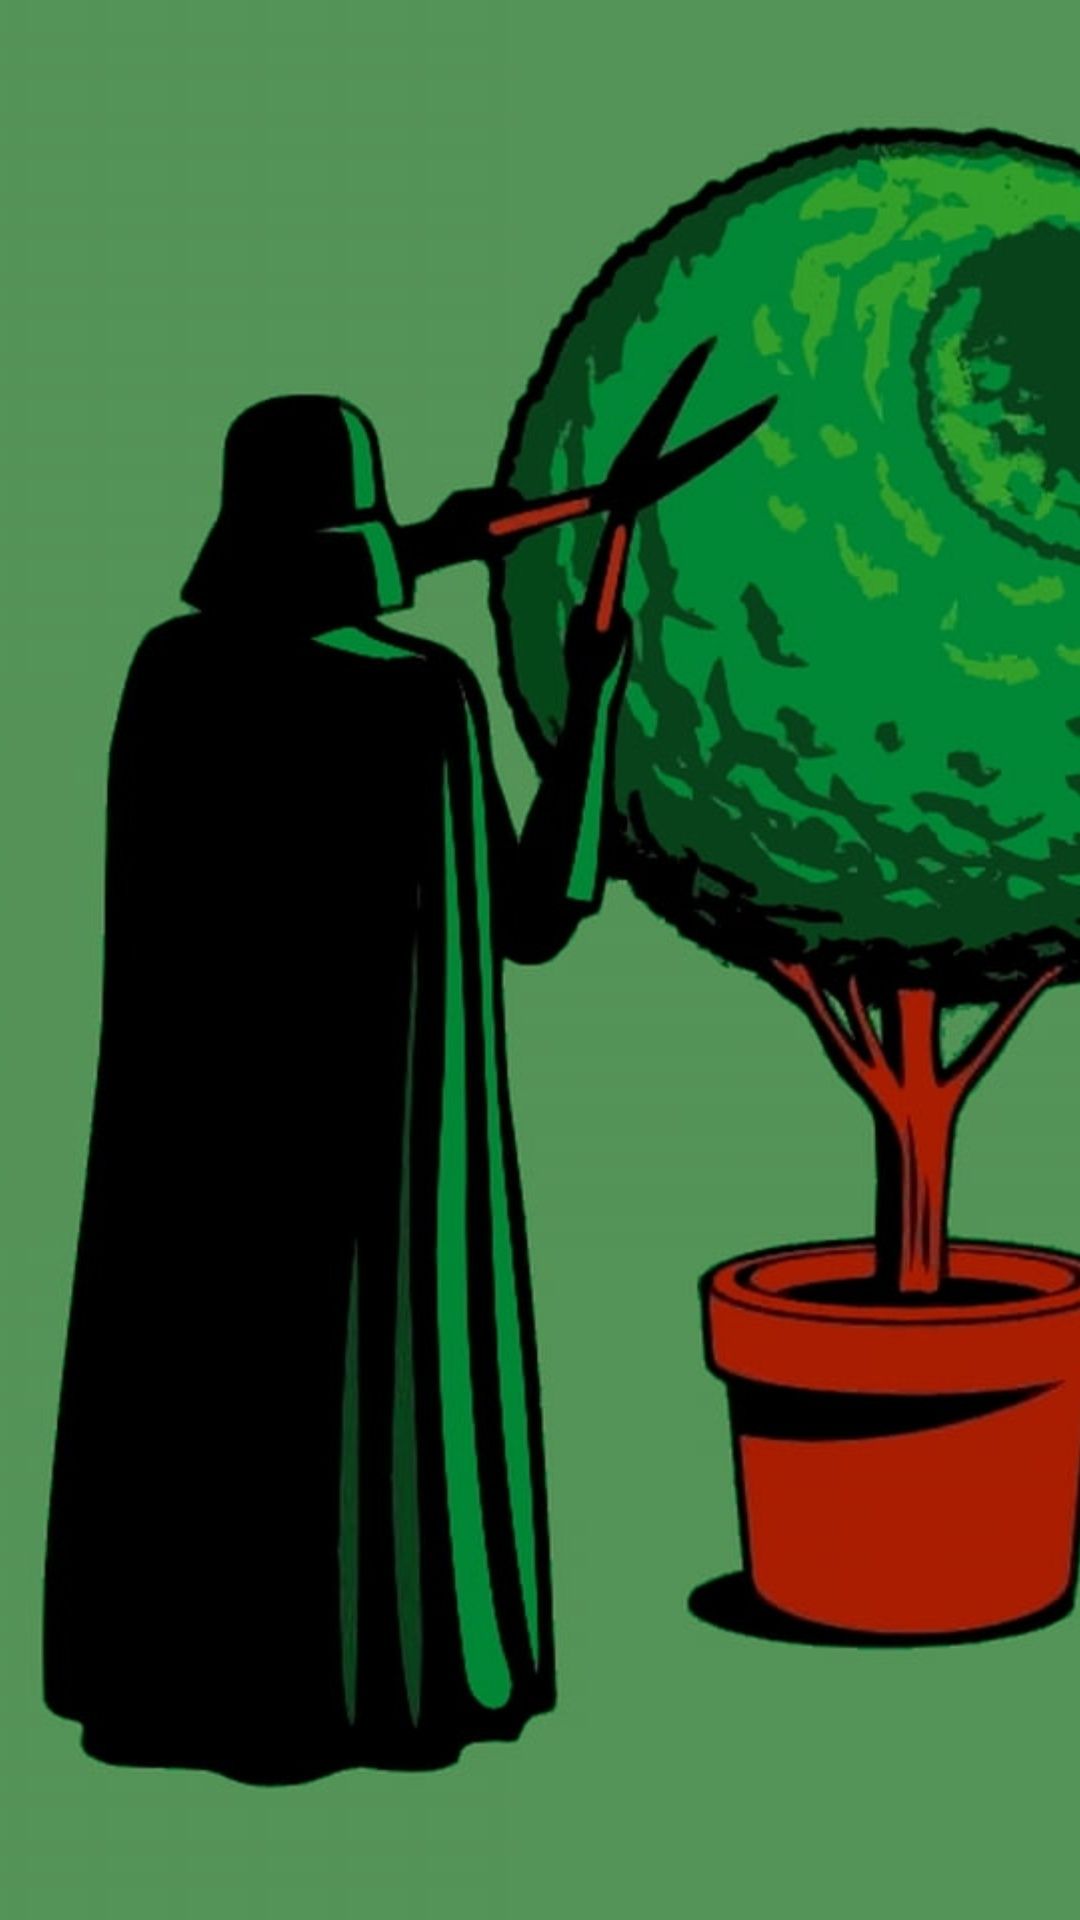 Darth vader trimming a topiary in the shape of the Death Star - Darth Vader